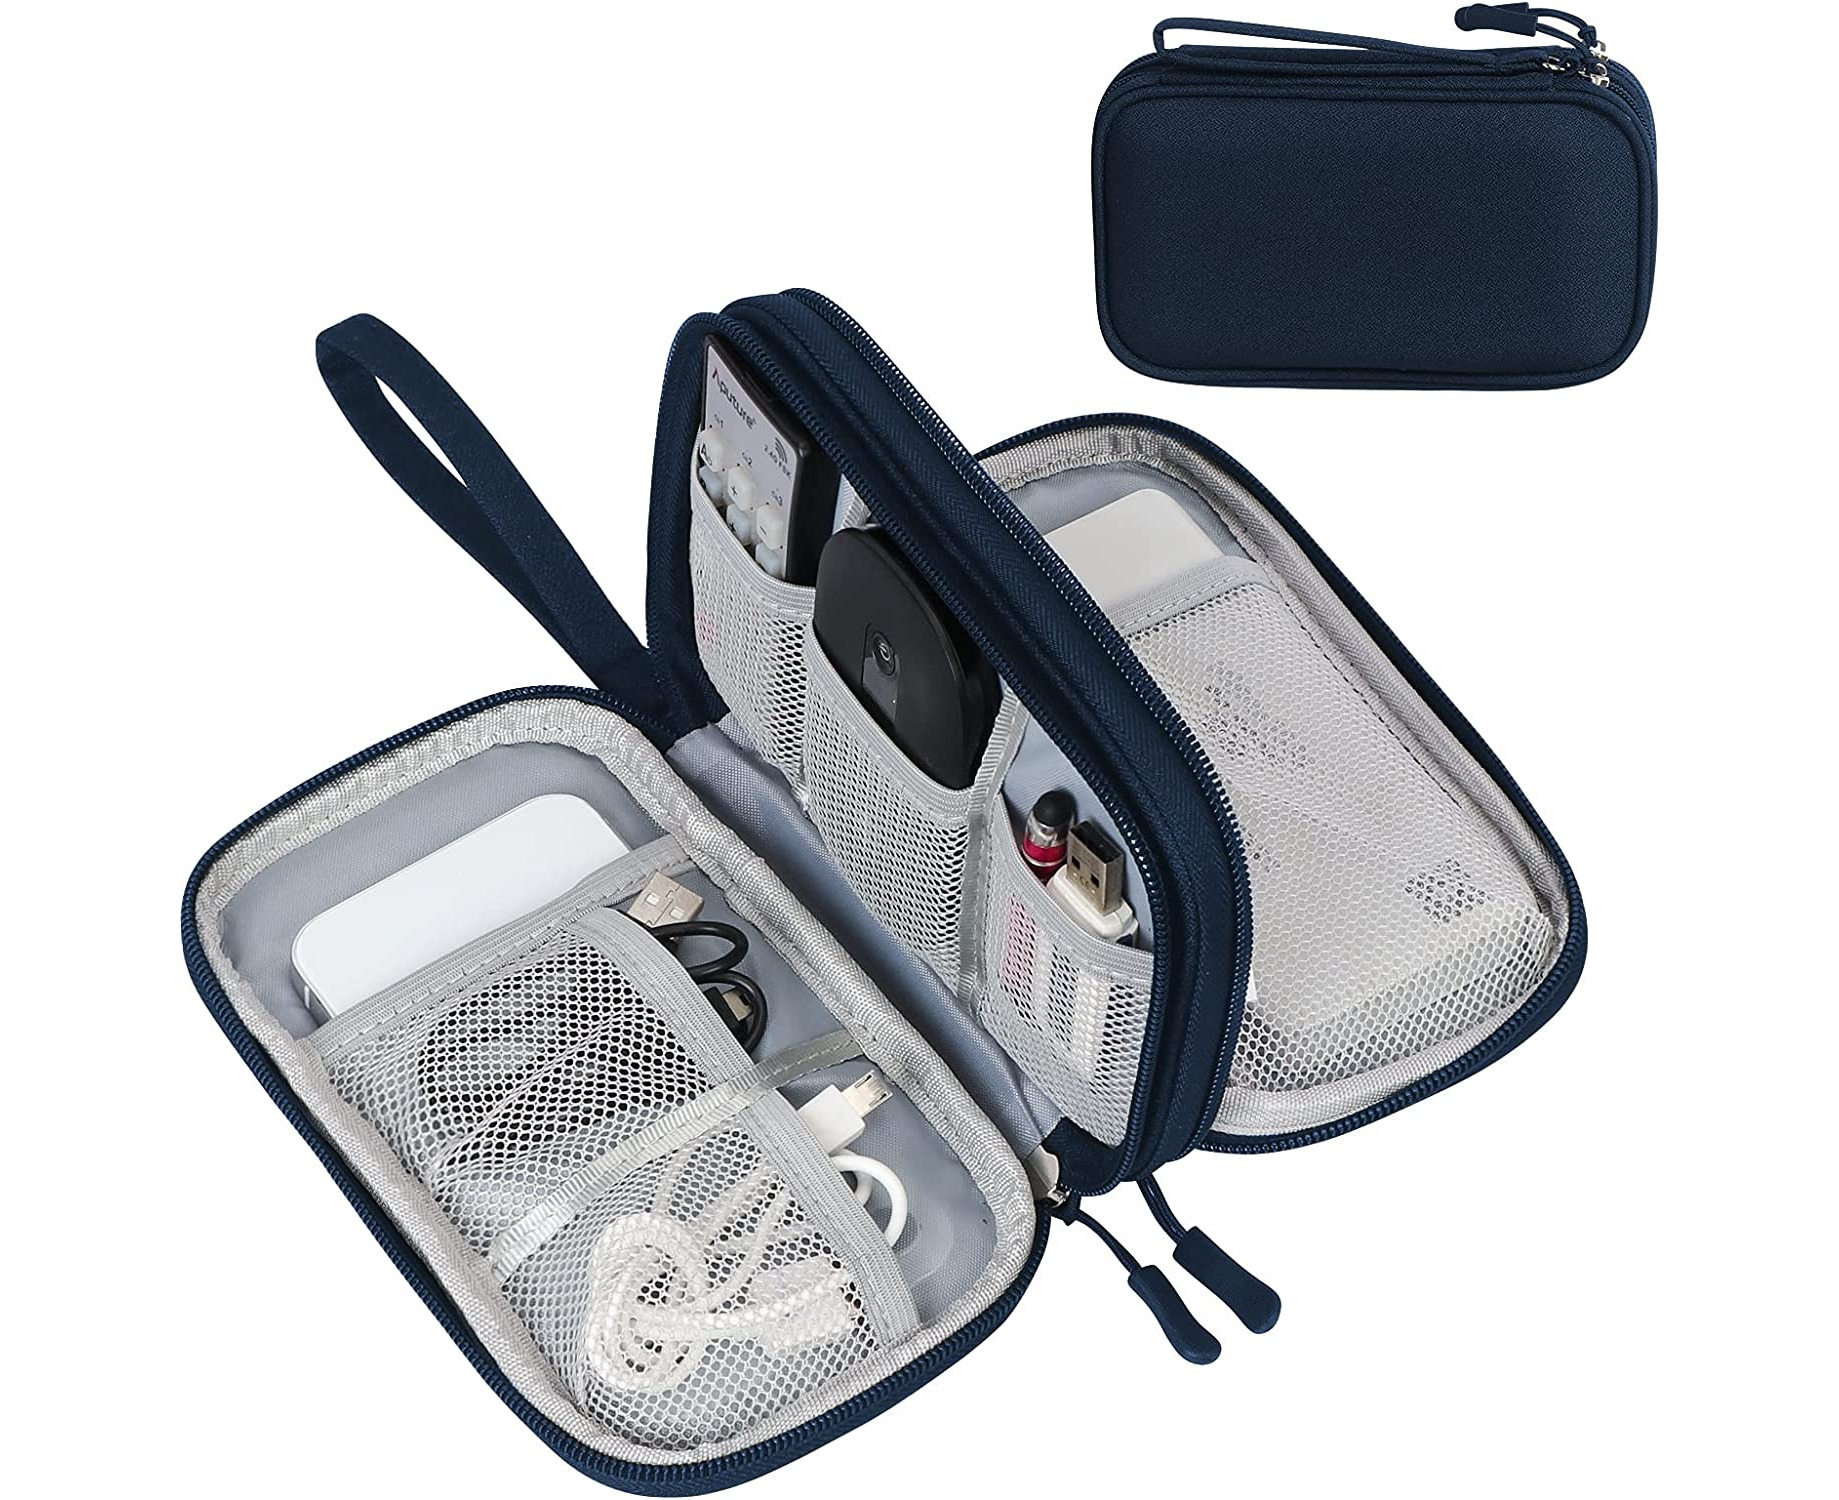 Cable Organizer Bag Computer Accessories Case Travel Accessory Organizer for Various USB Phone Charger and Cable 